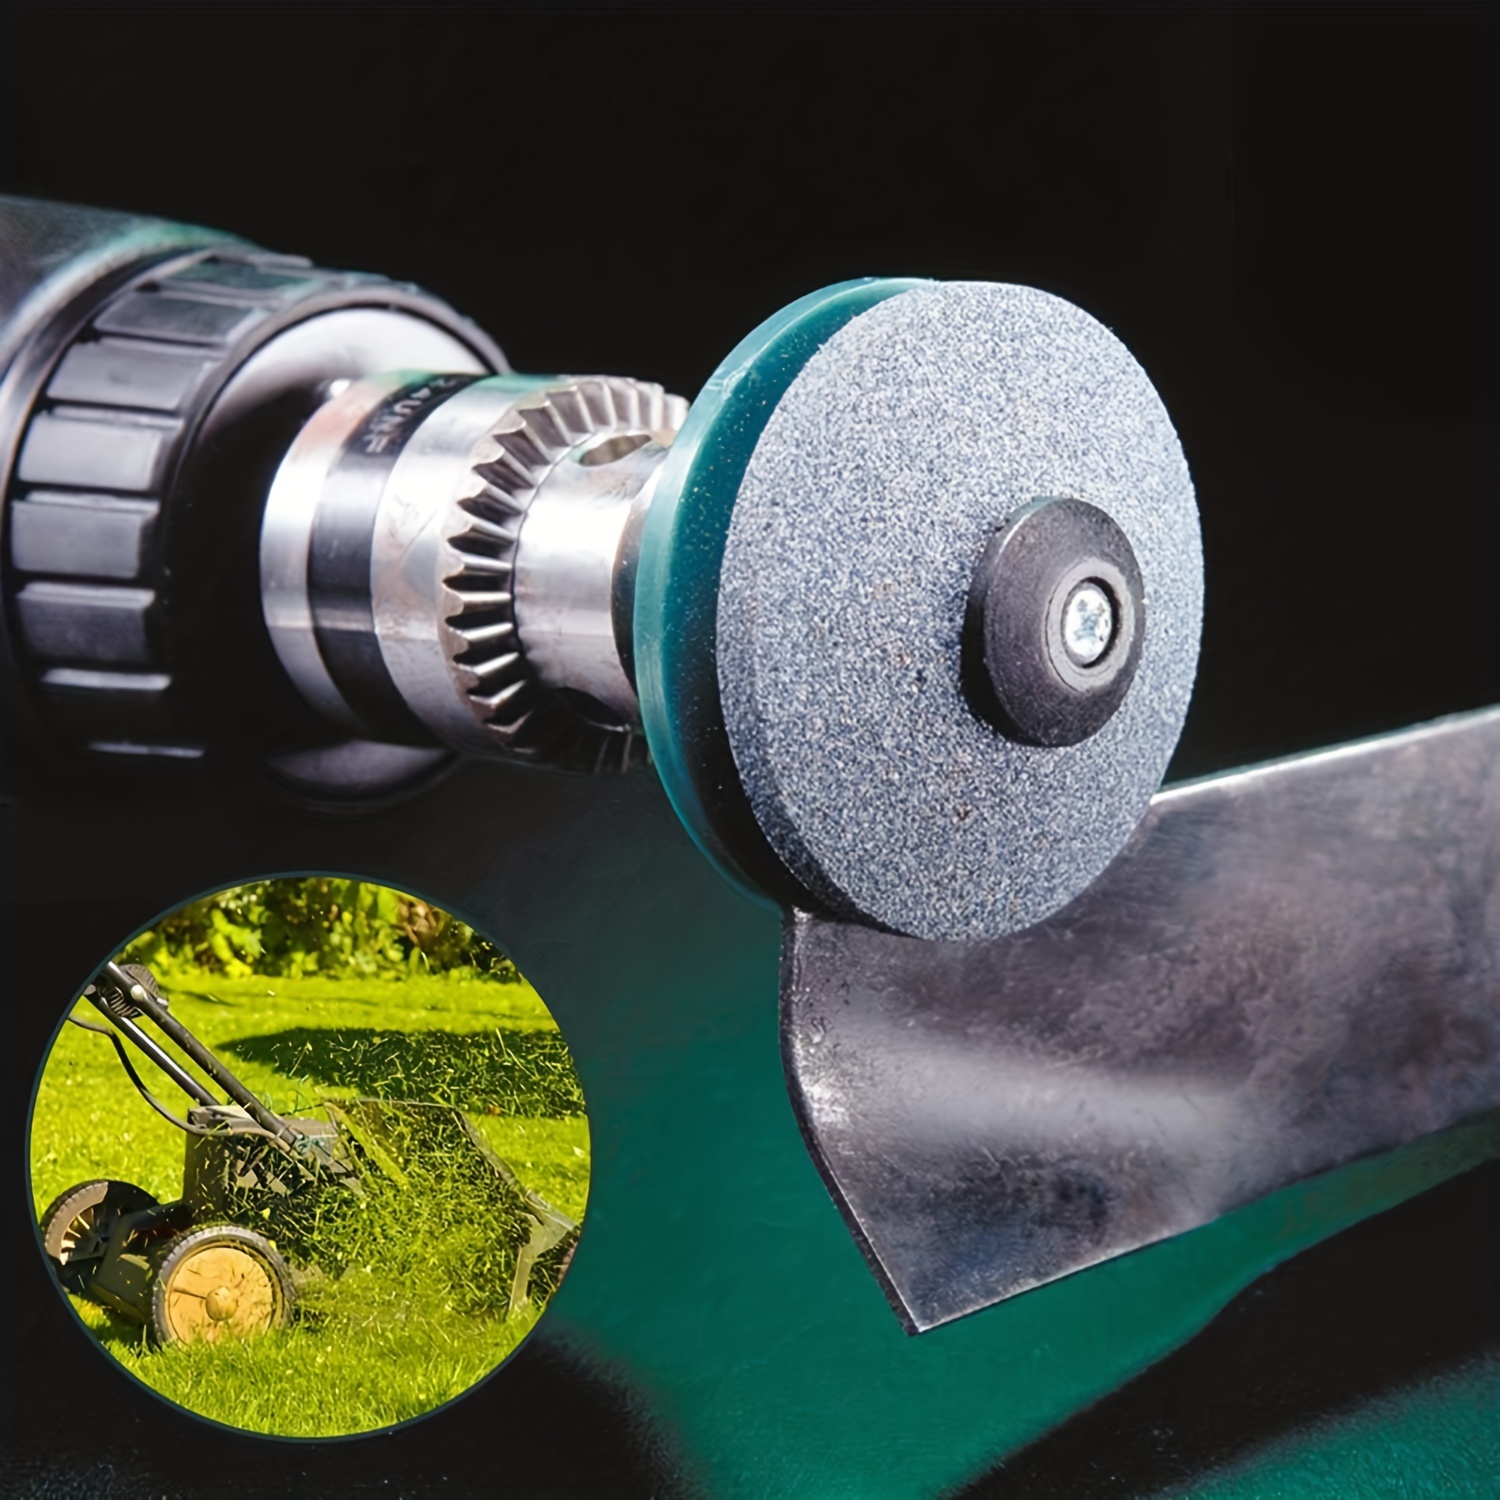 upgrade your lawn mower with this universal sharpener get professional level cuts every time